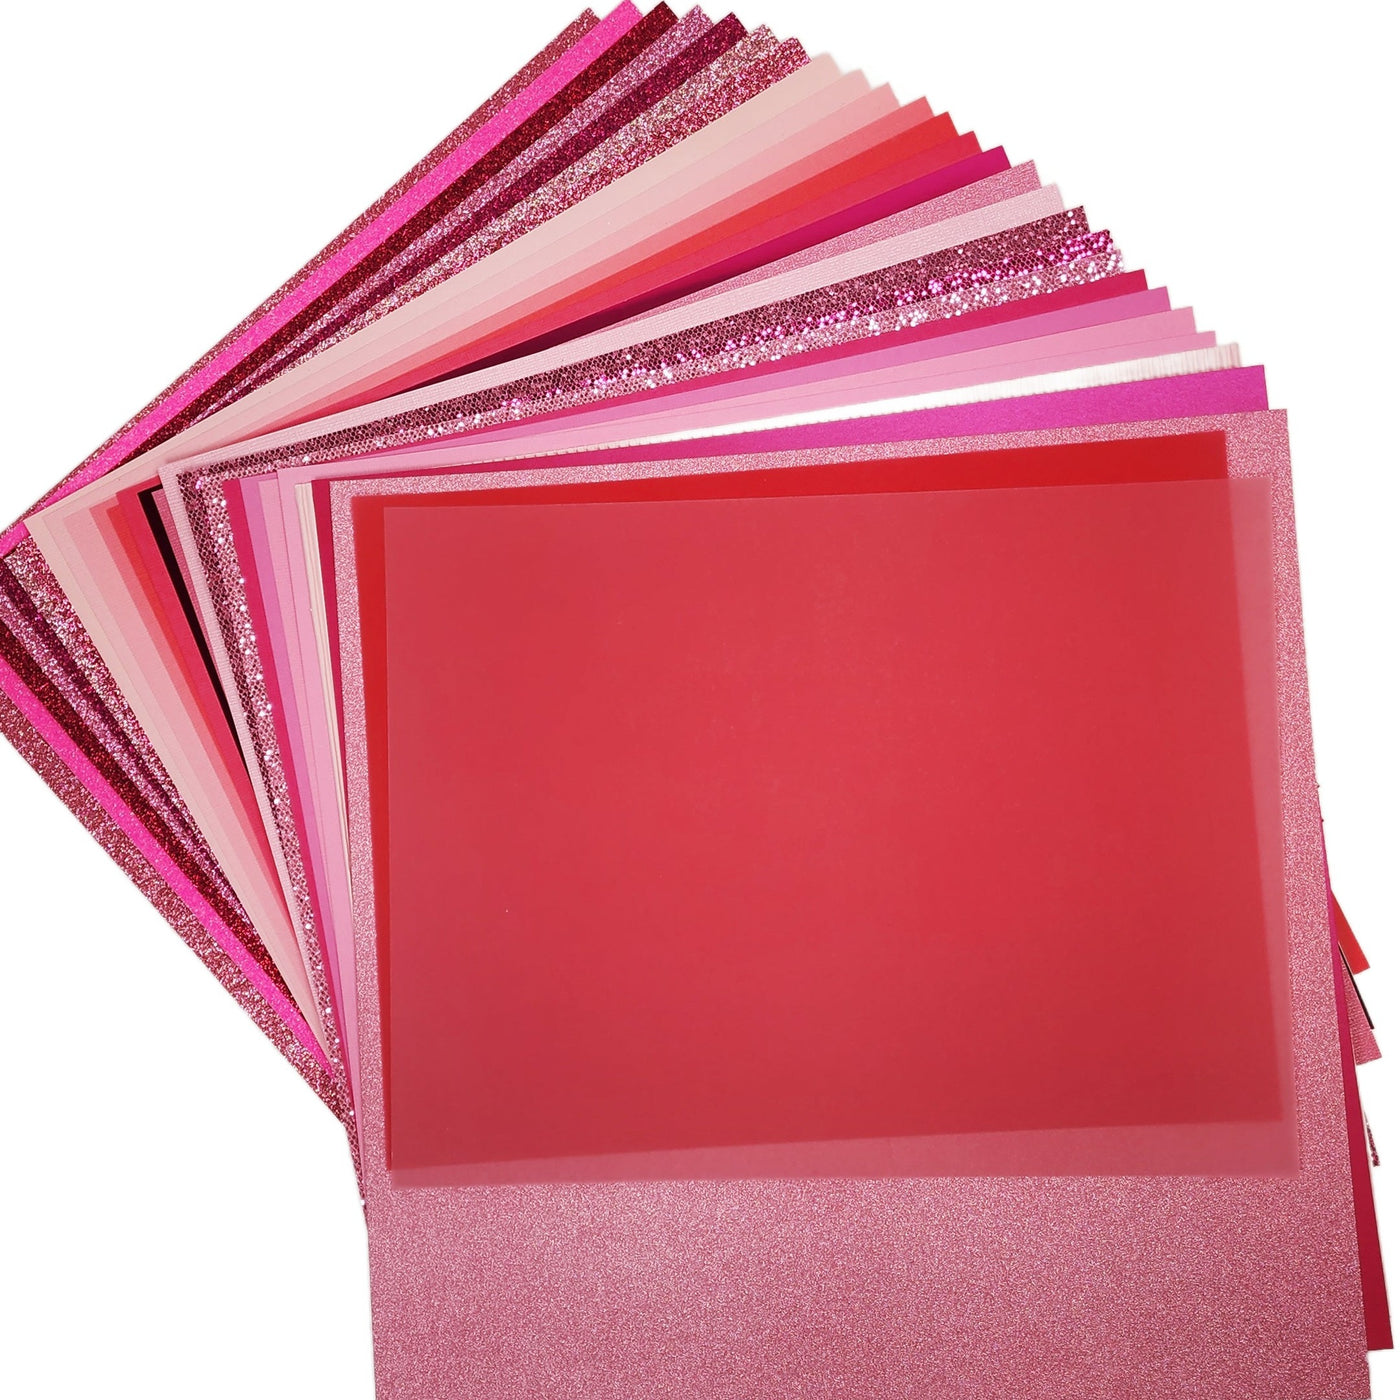 This variety pack includes 28 sheets of our most beautiful pink cardstock & specialty papers! Try textured cardstock, glitter cardstock, glimmer cardstock, mirror cardstock, and more. 